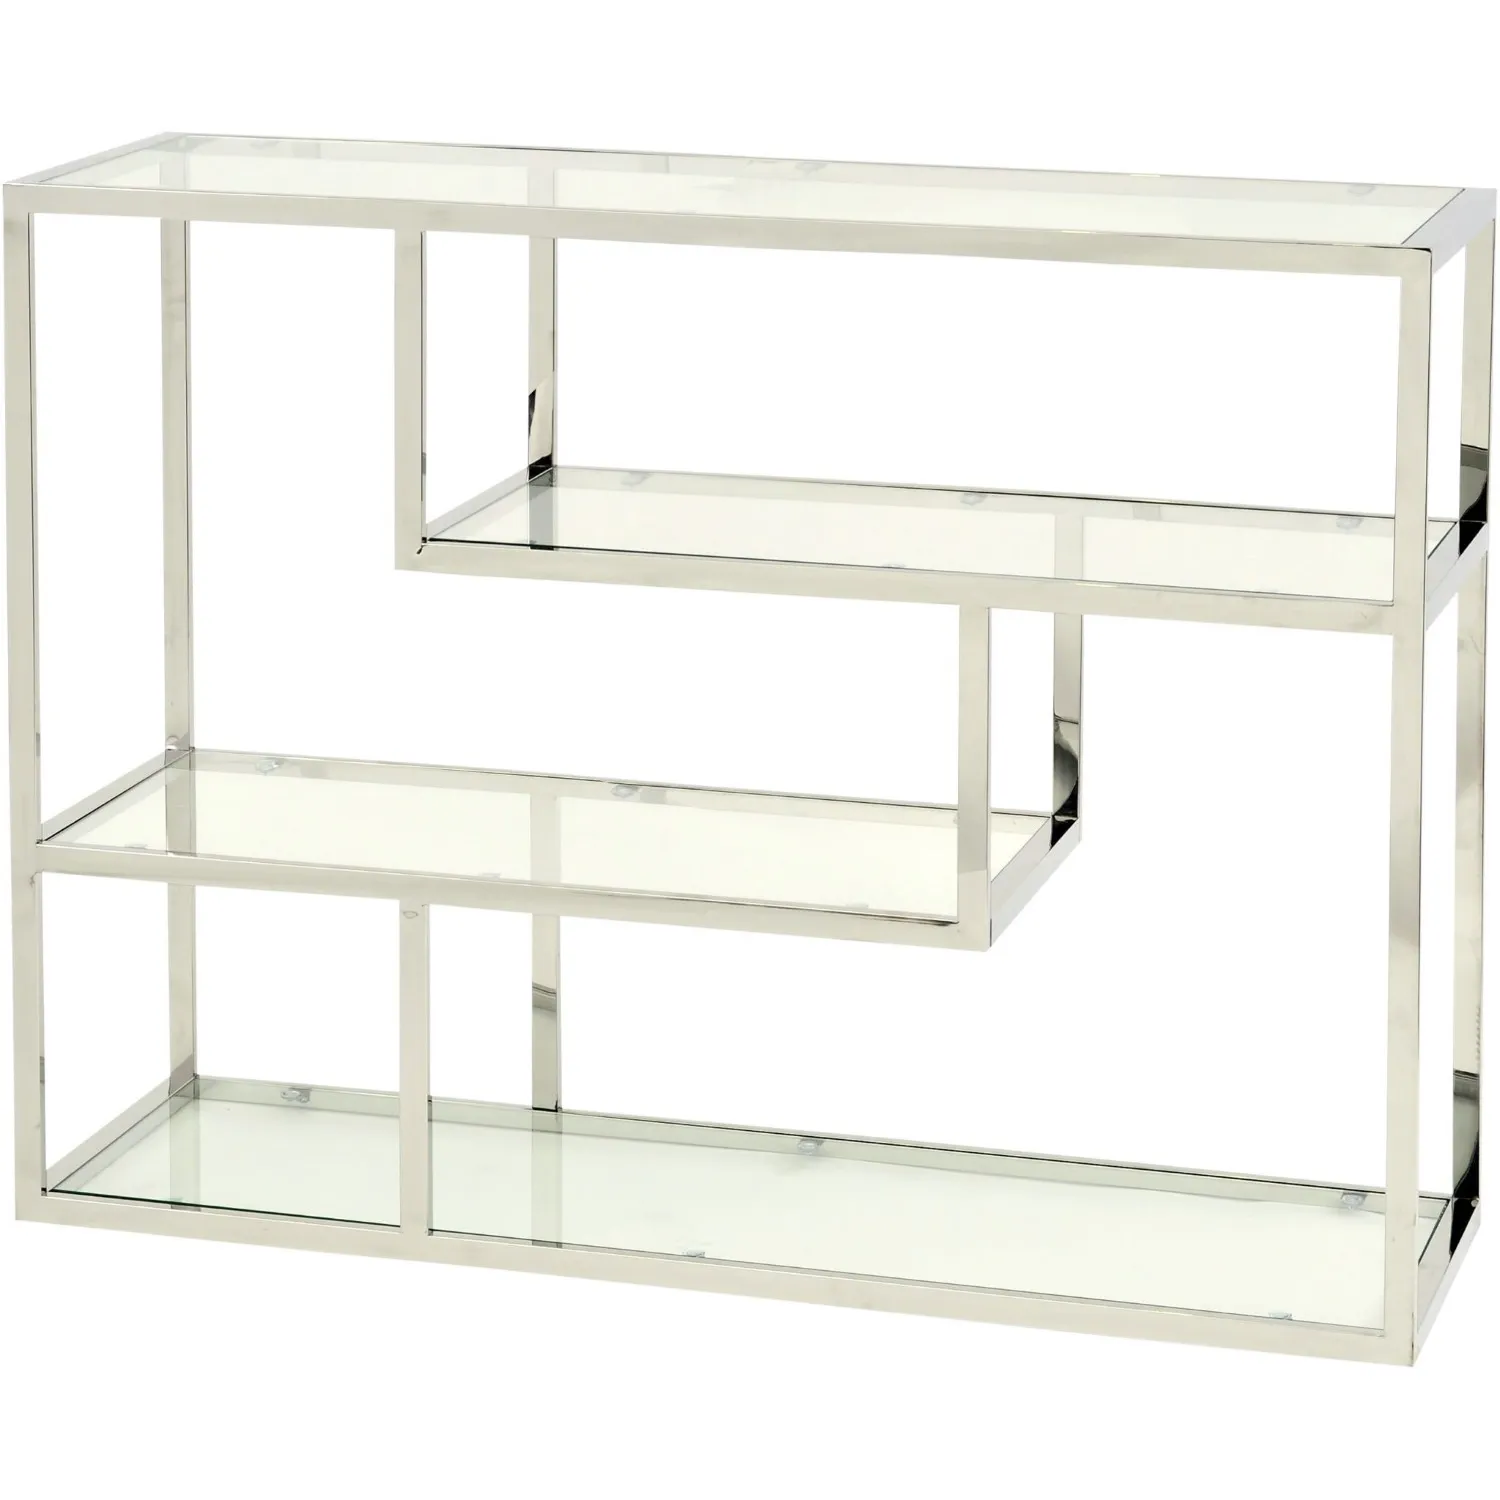 Stainless Steel and Glass Shelving Unit